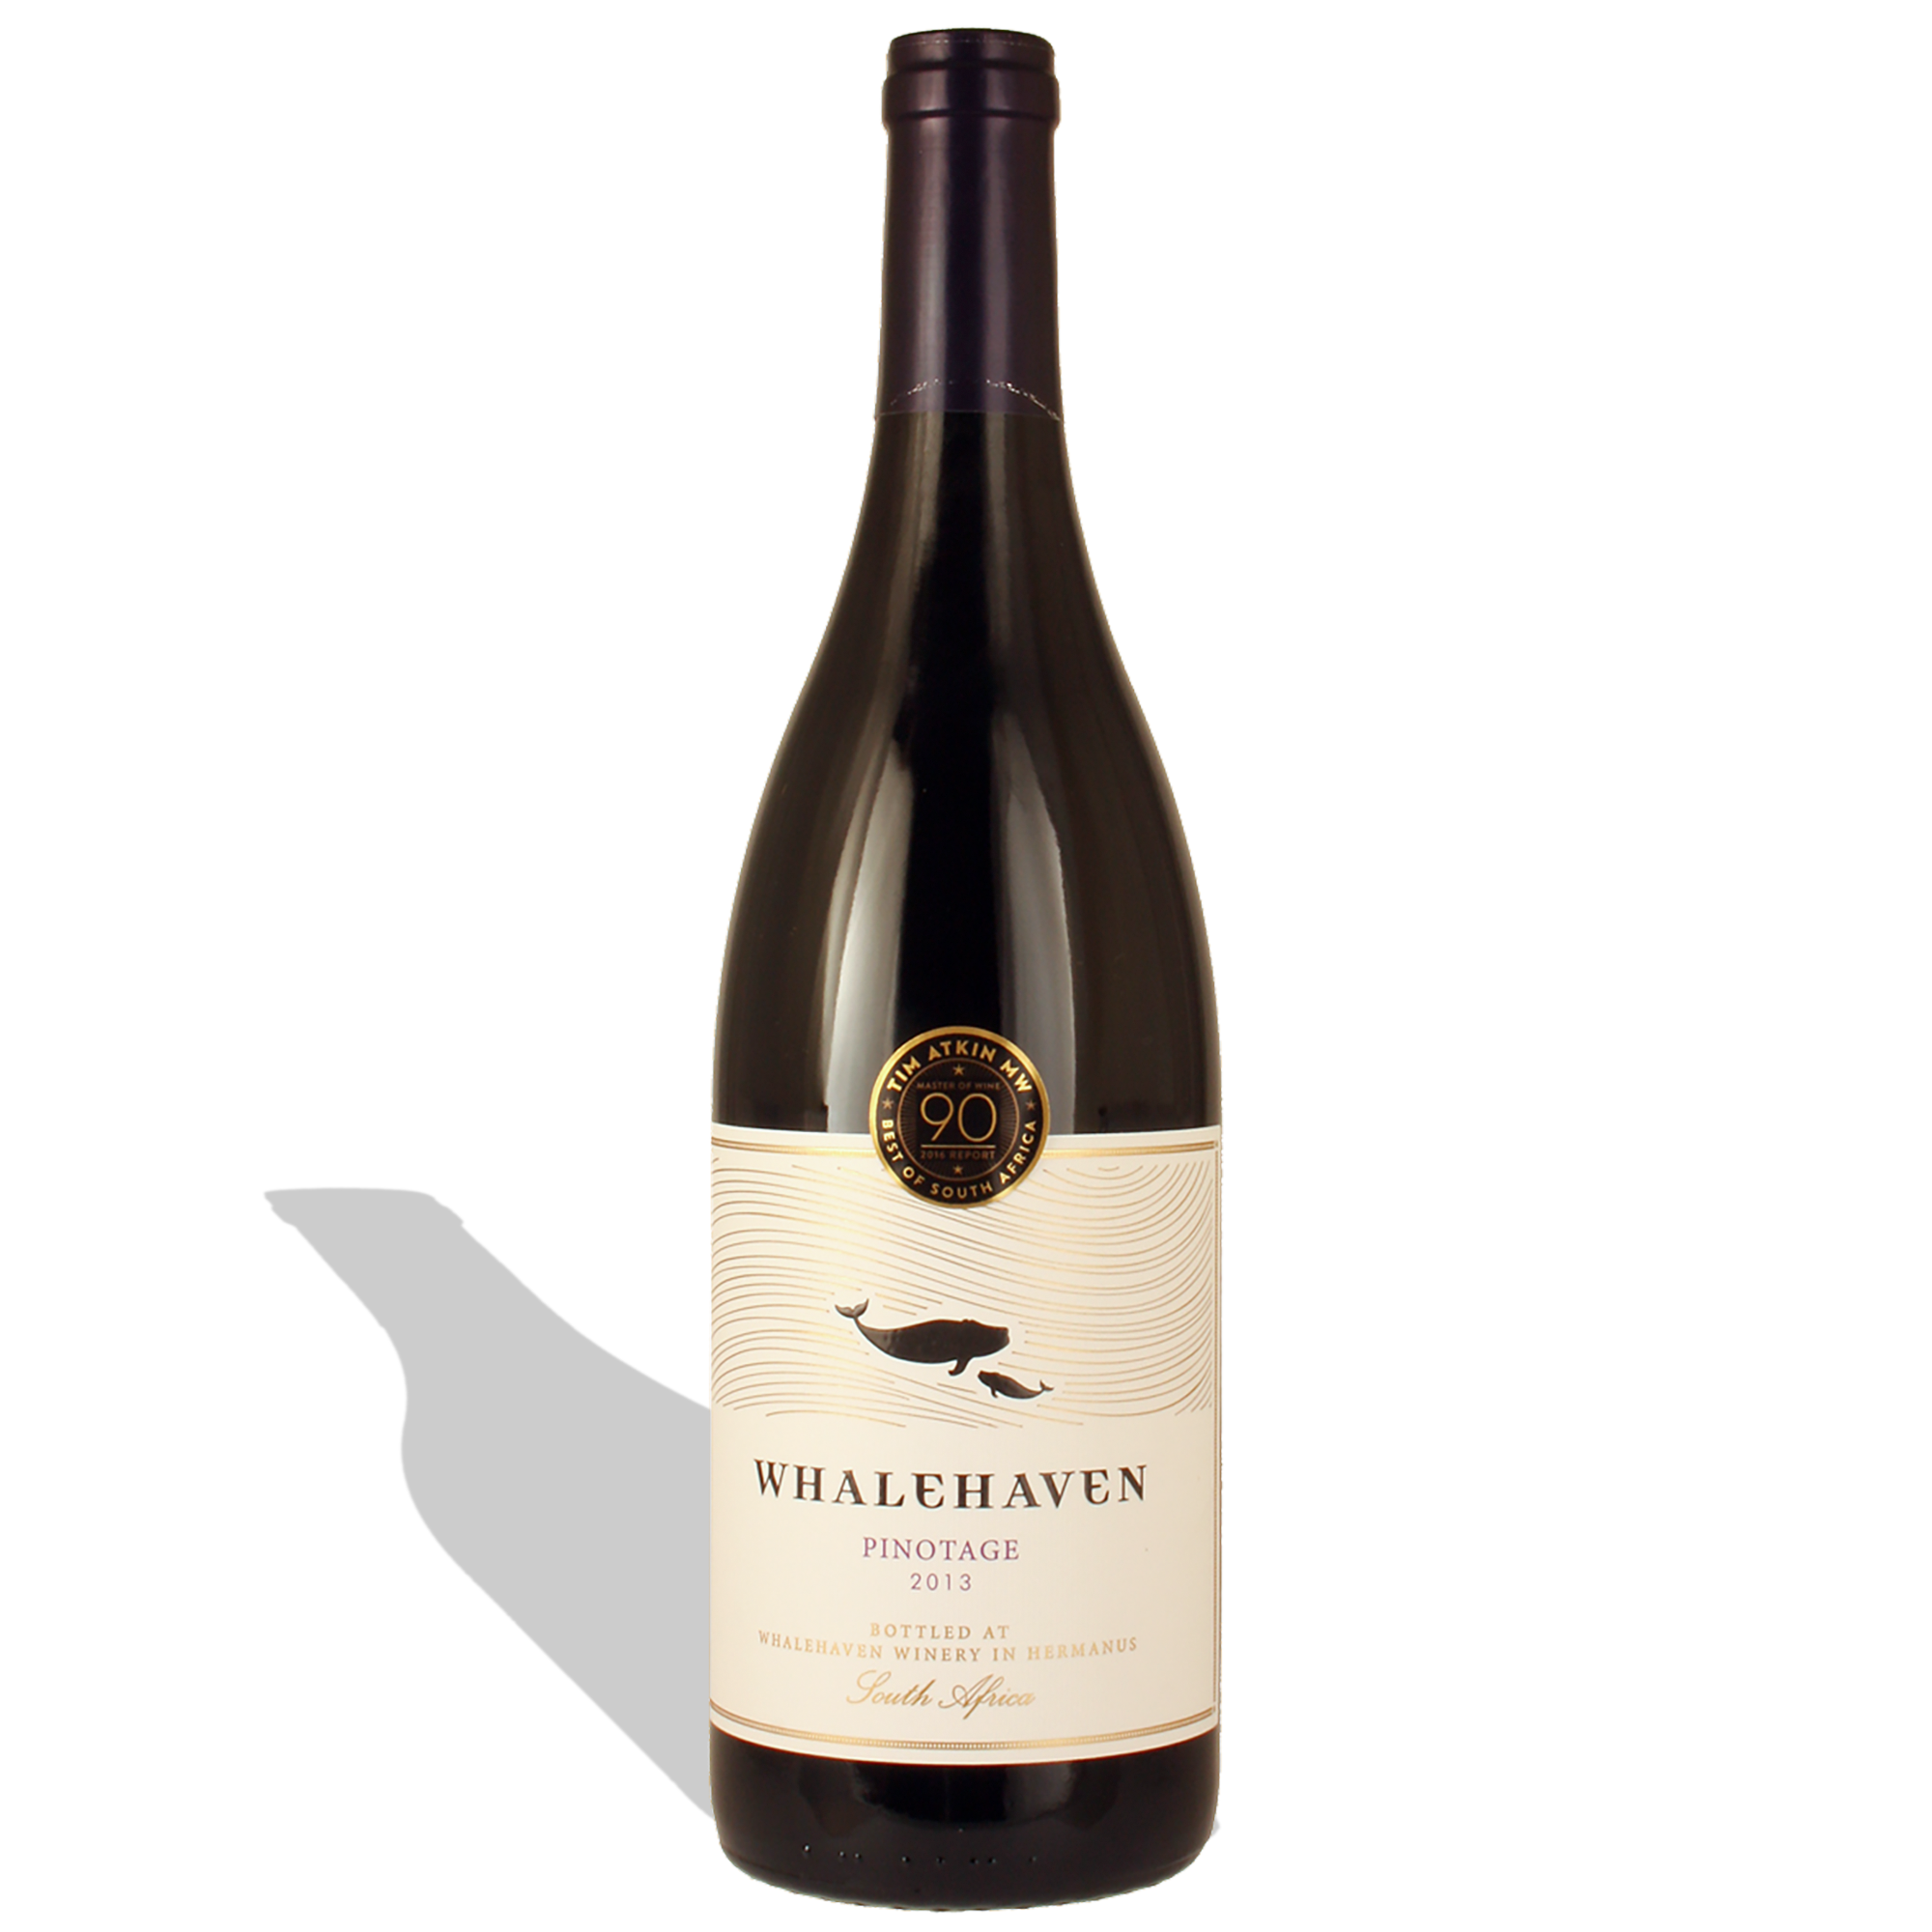 Whalehaven Pinotage 